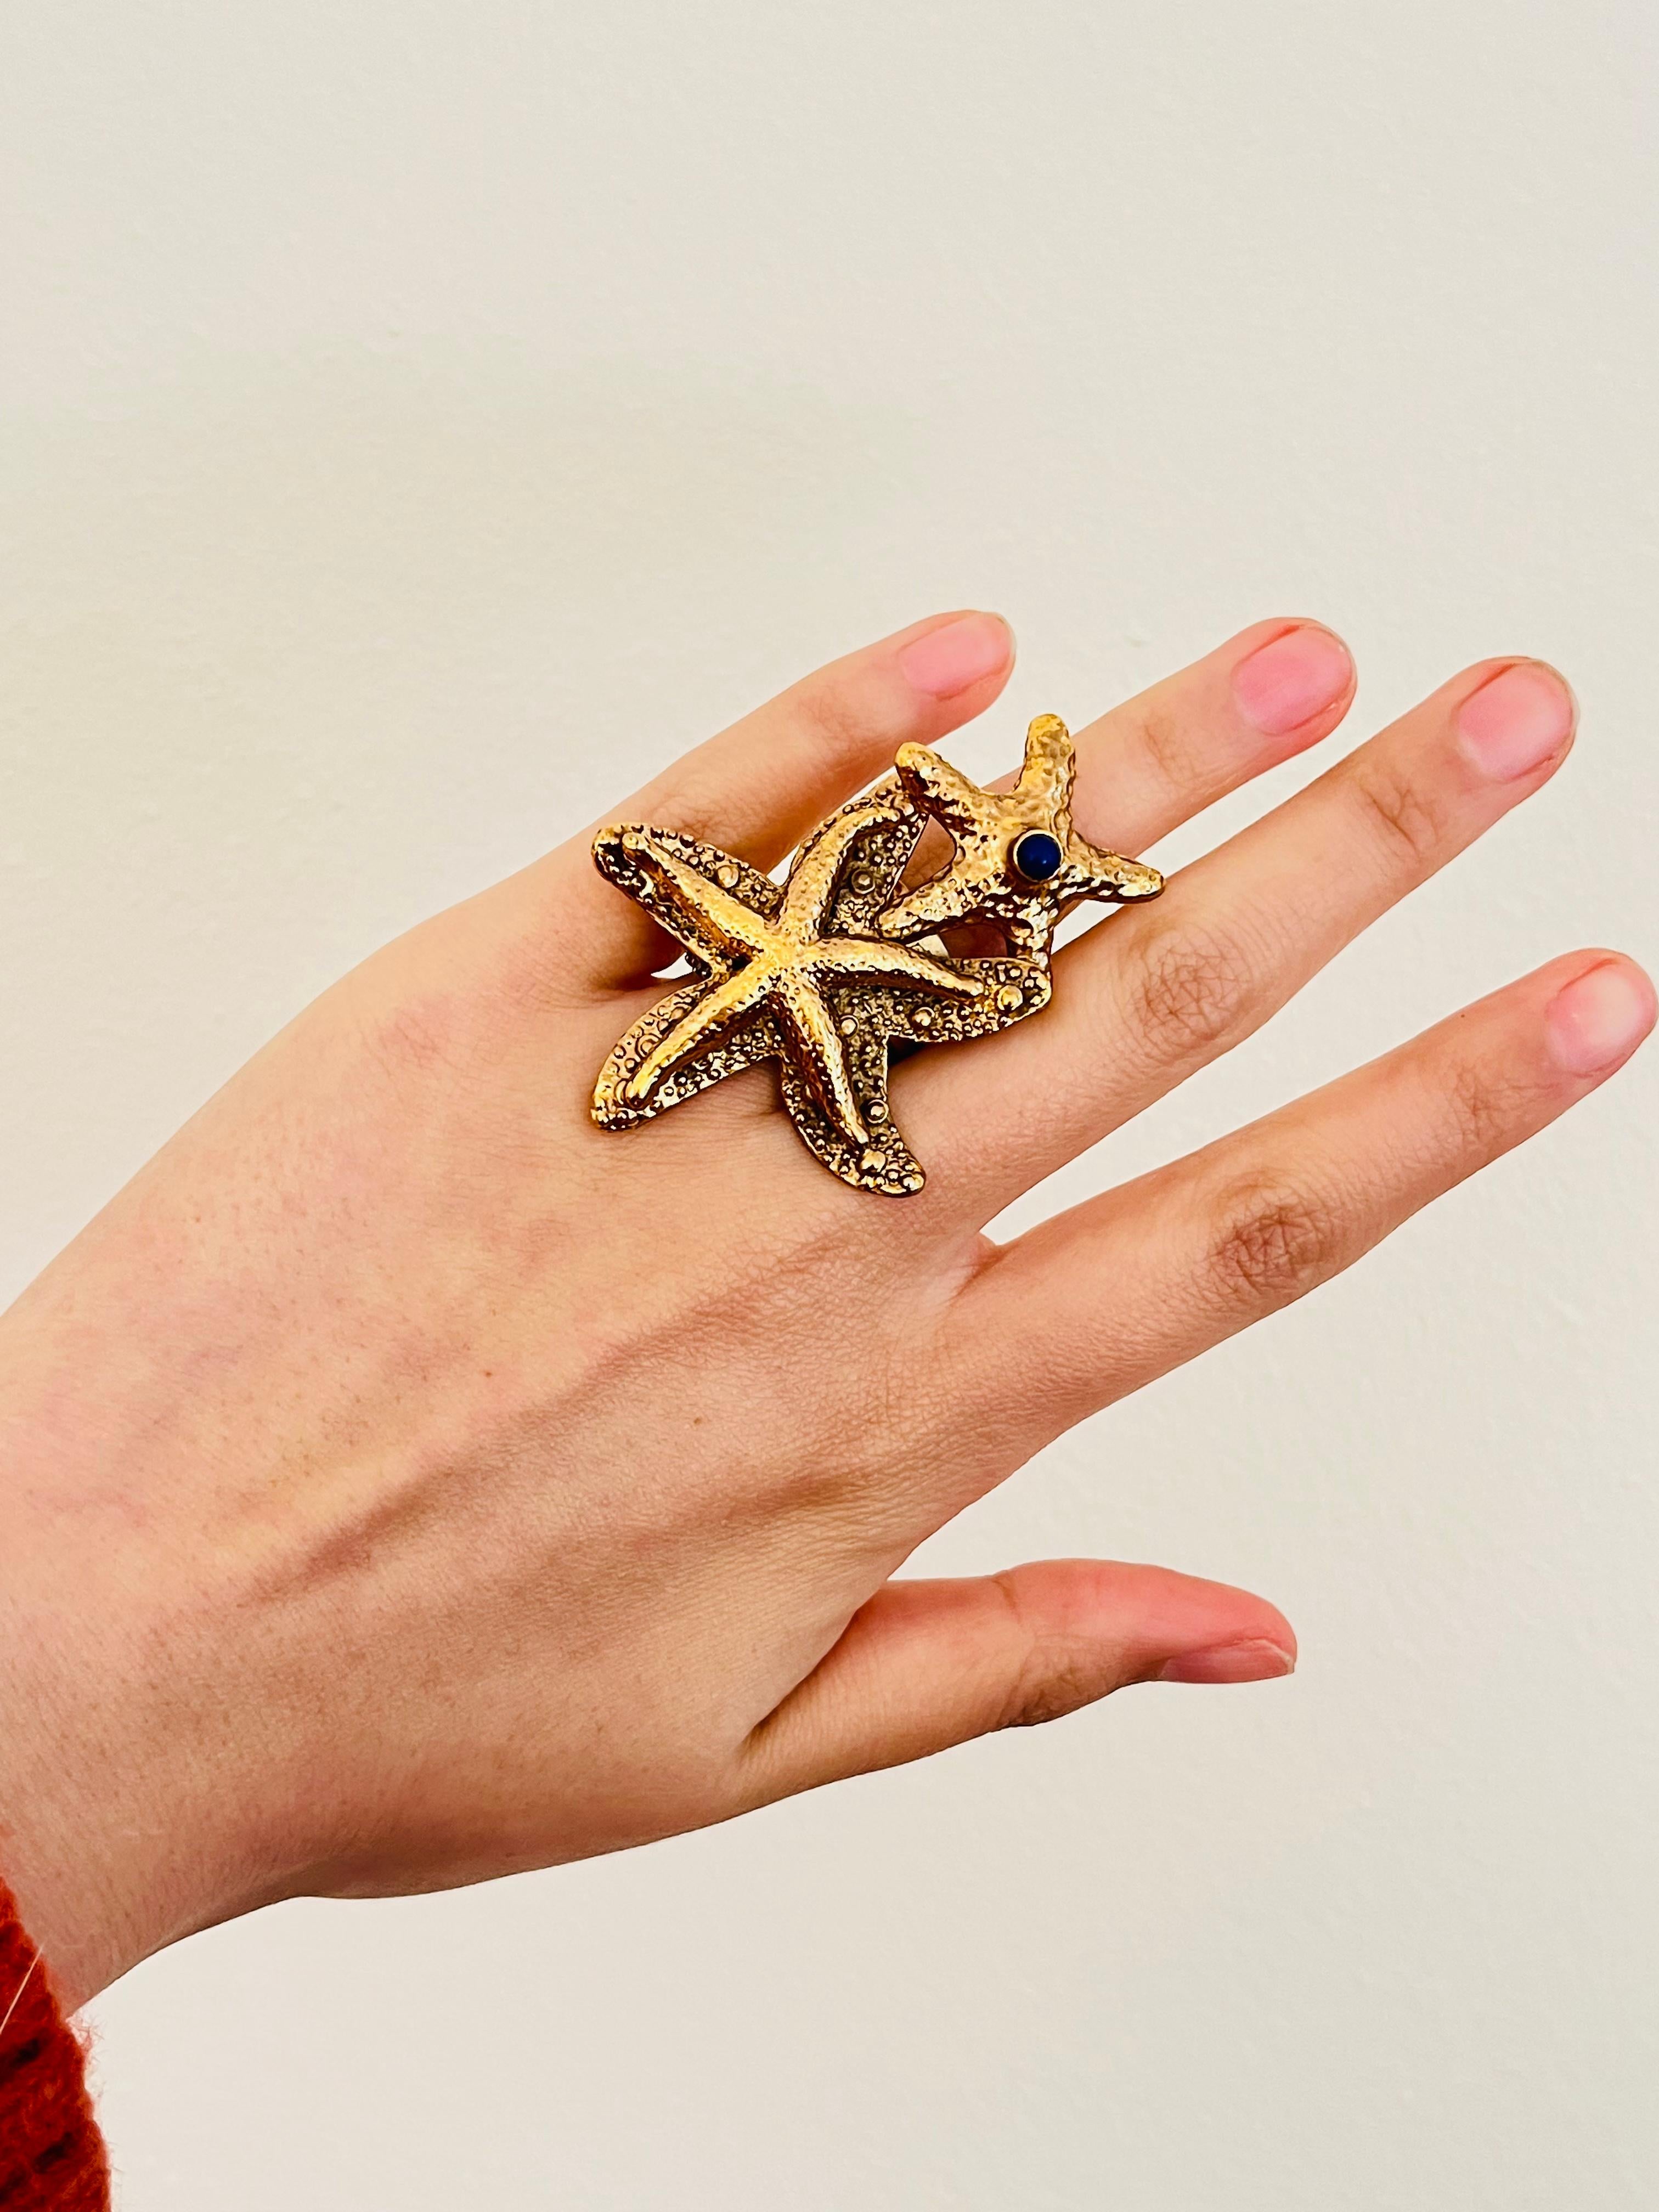 Yves Saint Laurent YSL Arty Large Double Starfish Statement Navy Dot Ring, US 6 In Excellent Condition For Sale In Wokingham, England